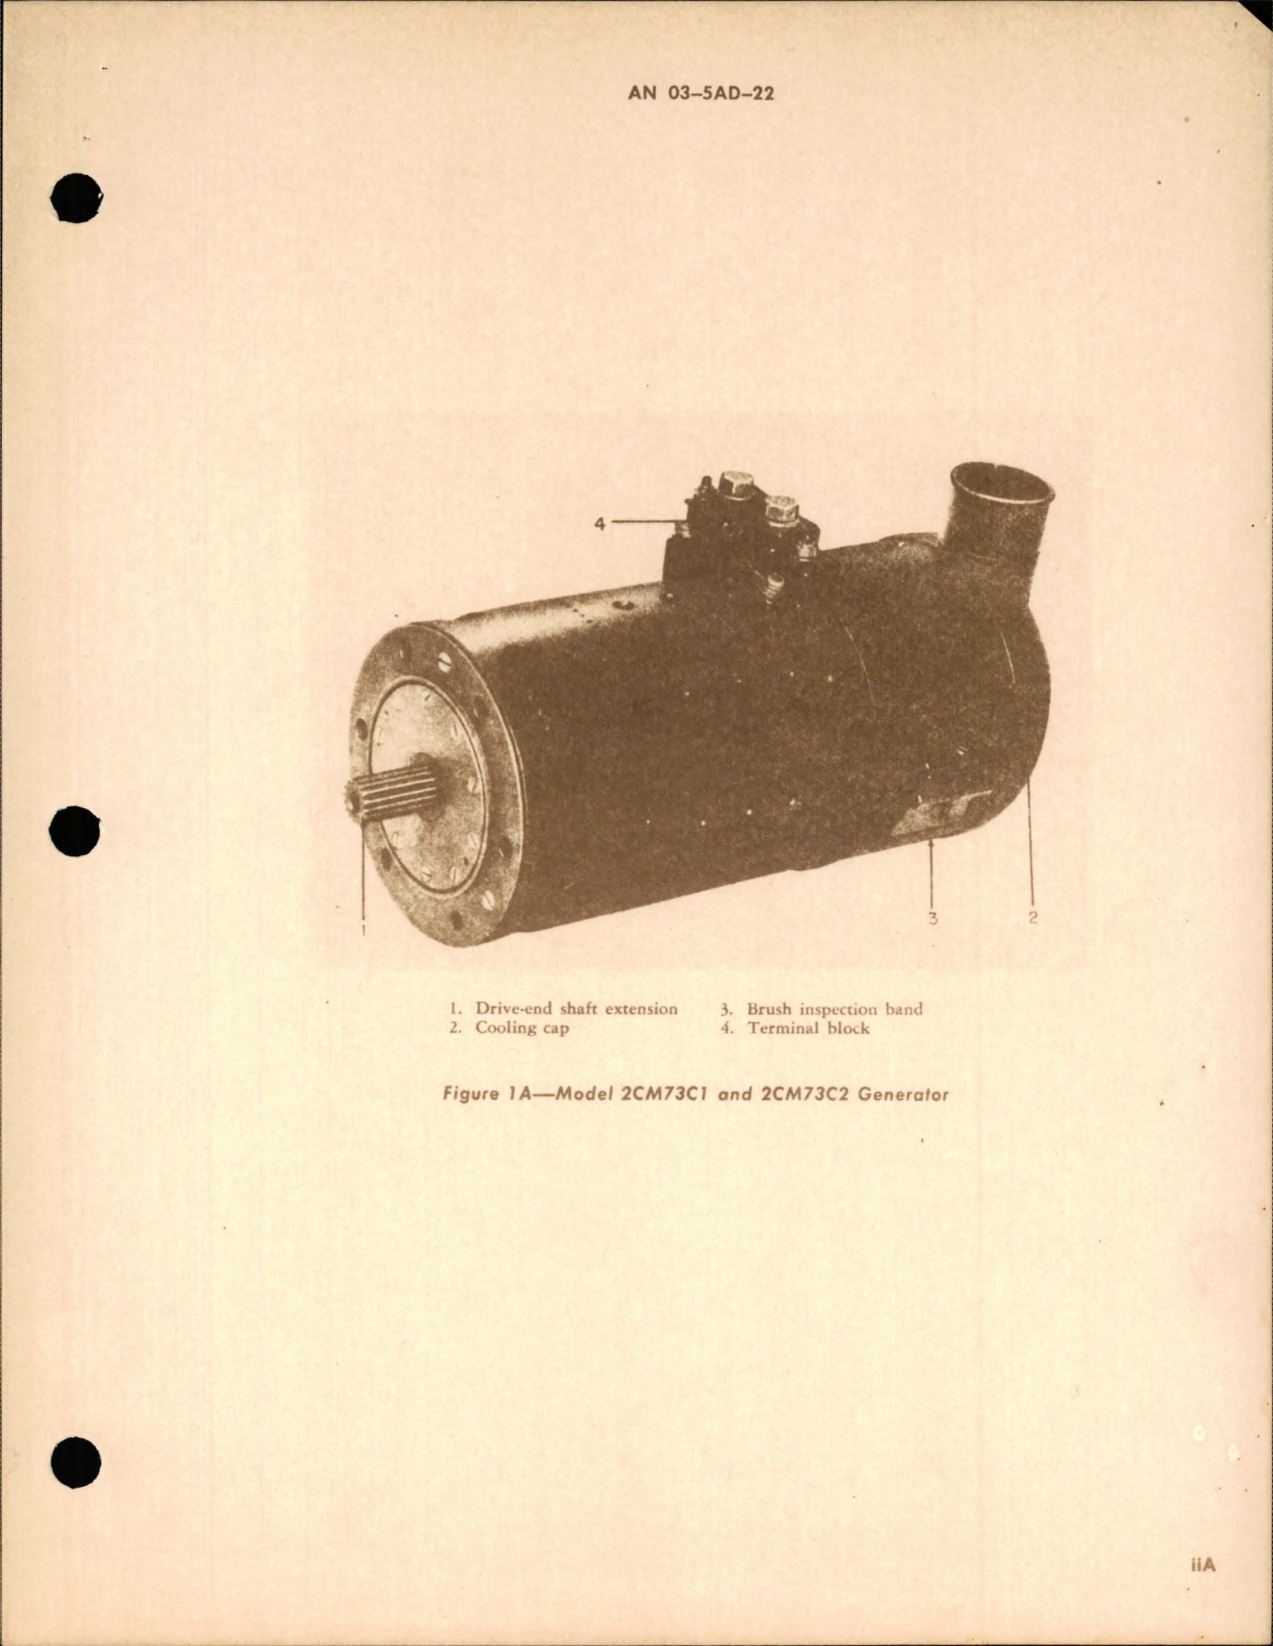 Sample page 5 from AirCorps Library document: Operation, Service, and Overhaul Instructions with Parts Catalog for Generators - Models 2CM73B7, 2CM73C1, and 2CM73C2